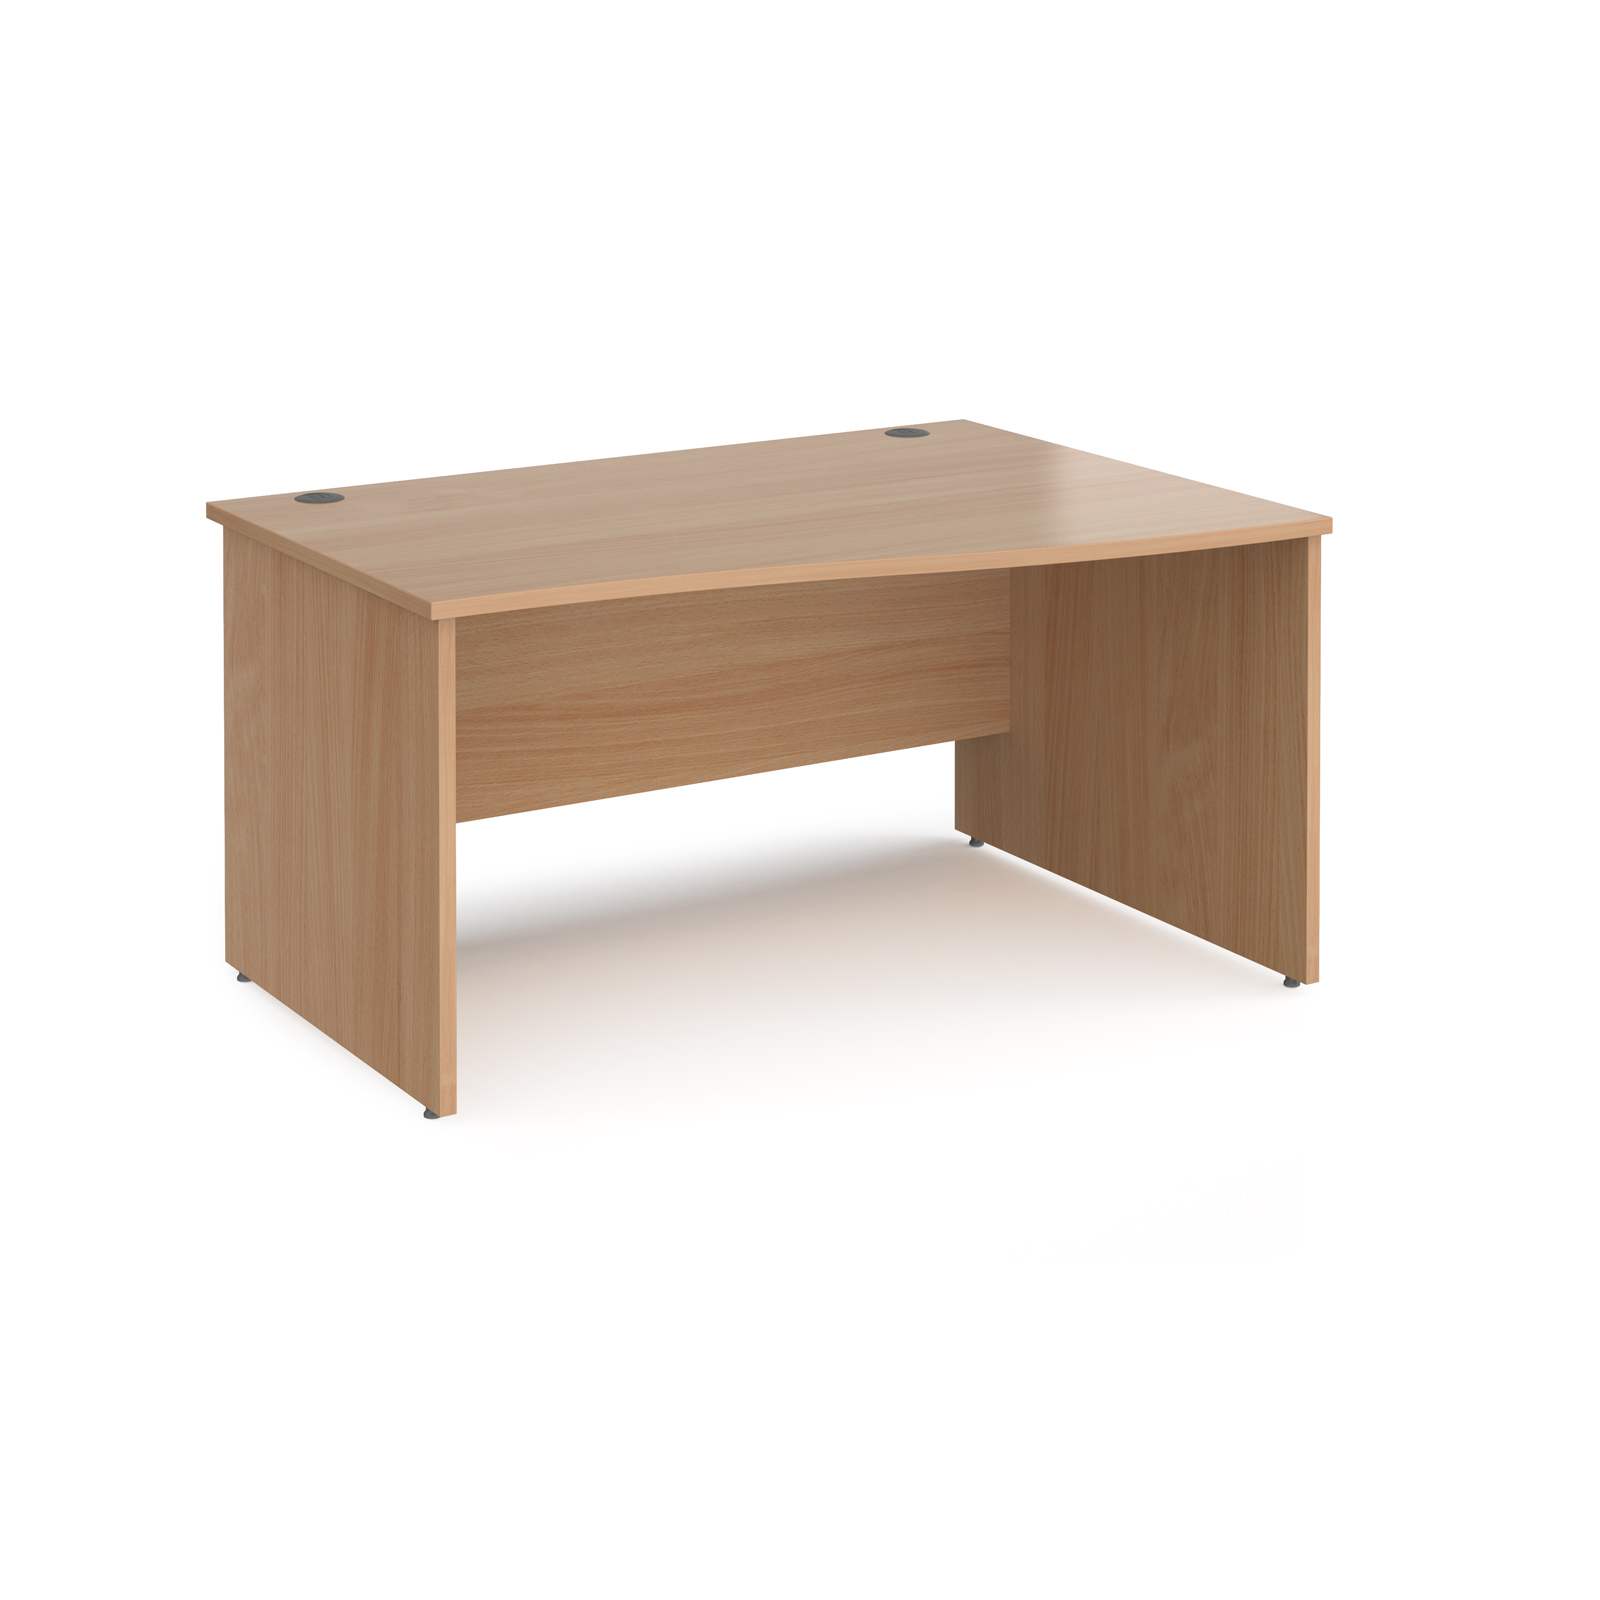 Maestro 25 right hand wave desk 1400mm wide - beech top with panel end leg